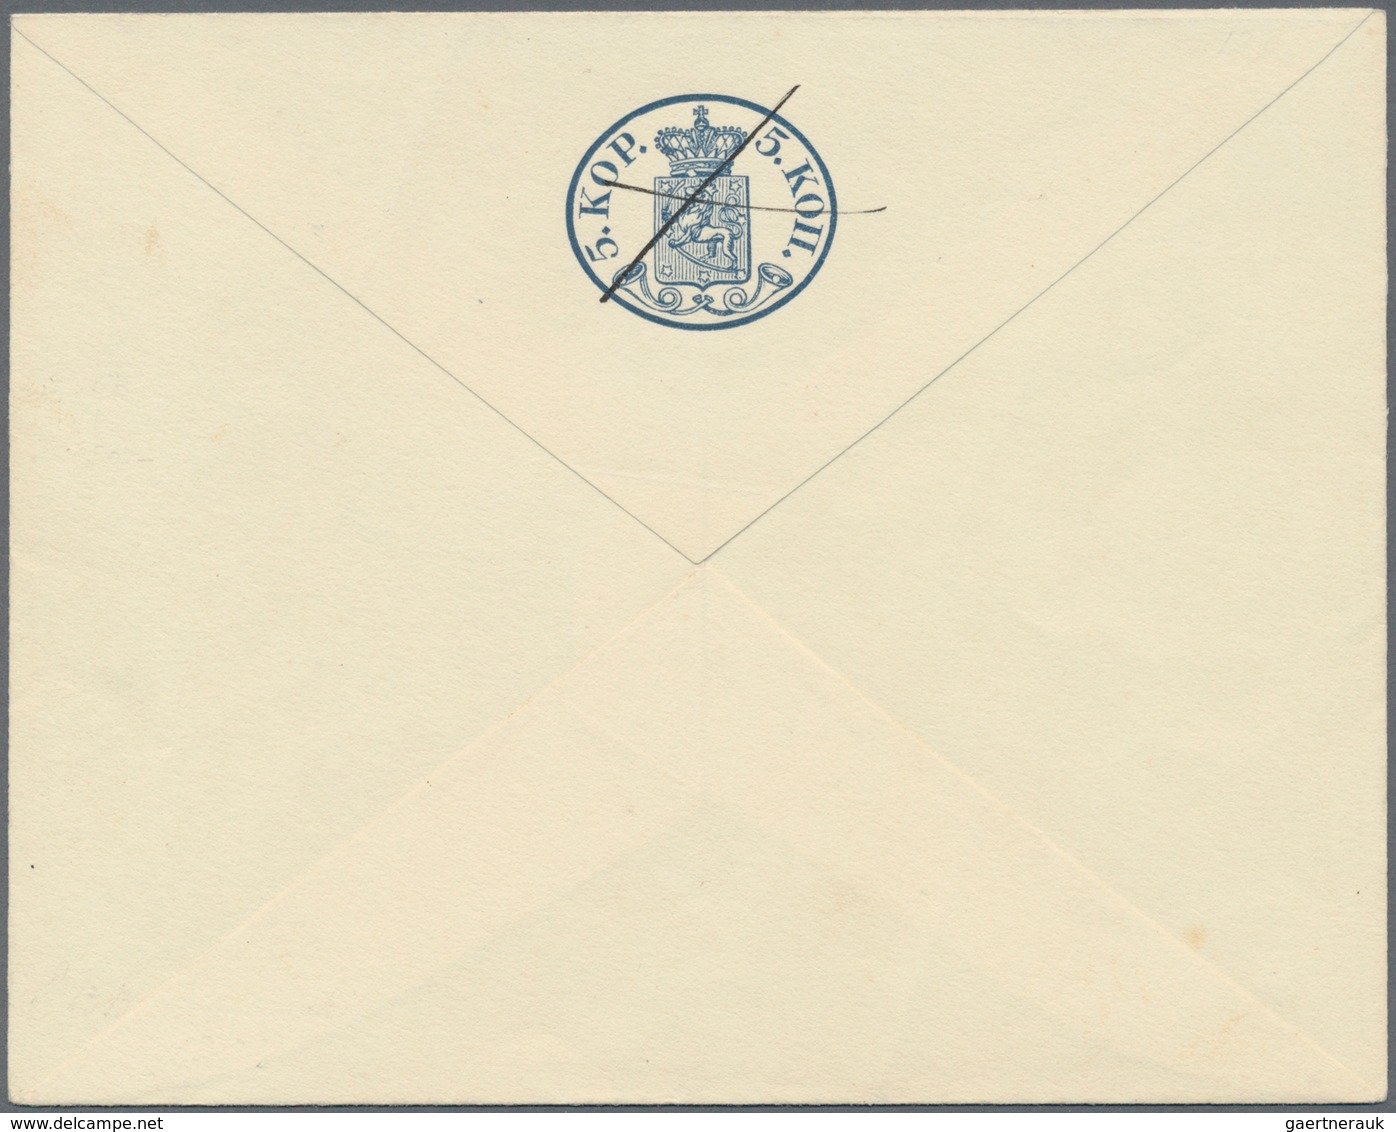 Finnland - Ganzsachen: 1860, 5 Kop. Blue Use Up Postal Stationery Cover Unused With Flap-stamp 5 Kop - Postal Stationery